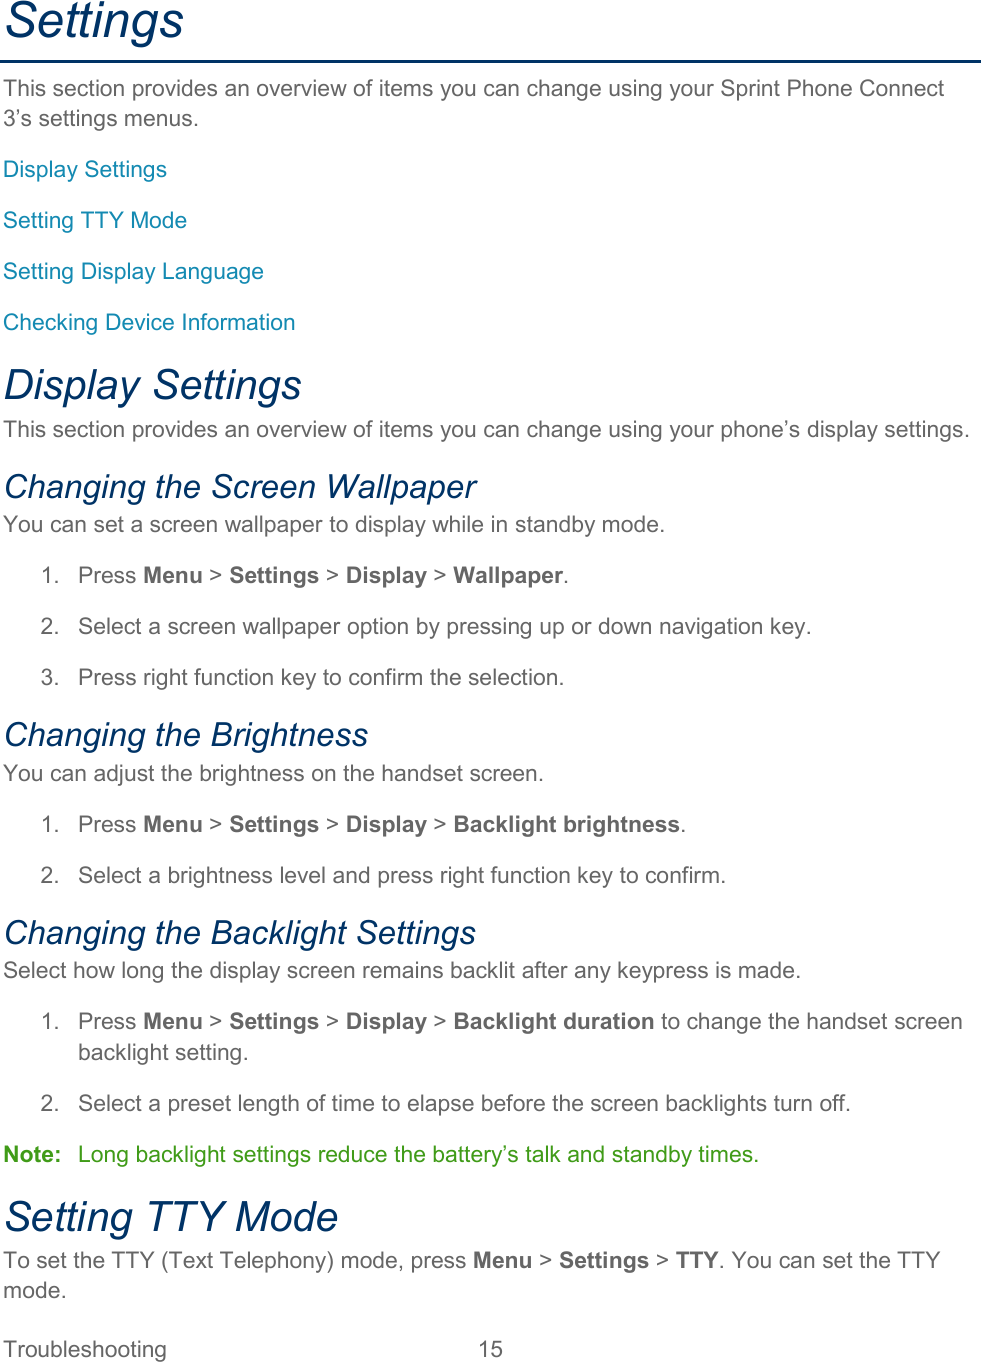 Troubleshooting 15   Settings This section provides an overview of items you can change using your Sprint Phone Connect 3’s settings menus. Display Settings Setting TTY Mode Setting Display Language Checking Device Information Display Settings This section provides an overview of items you can change using your phone’s display settings. Changing the Screen Wallpaper You can set a screen wallpaper to display while in standby mode. 1.  Press Menu &gt; Settings &gt; Display &gt; Wallpaper. 2. Select a screen wallpaper option by pressing up or down navigation key. 3.  Press right function key to confirm the selection. Changing the Brightness You can adjust the brightness on the handset screen. 1.  Press Menu &gt; Settings &gt; Display &gt; Backlight brightness. 2. Select a brightness level and press right function key to confirm. Changing the Backlight Settings Select how long the display screen remains backlit after any keypress is made. 1.  Press Menu &gt; Settings &gt; Display &gt; Backlight duration to change the handset screen backlight setting. 2.  Select a preset length of time to elapse before the screen backlights turn off. Note: Long backlight settings reduce the battery’s talk and standby times. Setting TTY Mode To set the TTY (Text Telephony) mode, press Menu &gt; Settings &gt; TTY. You can set the TTY mode. 